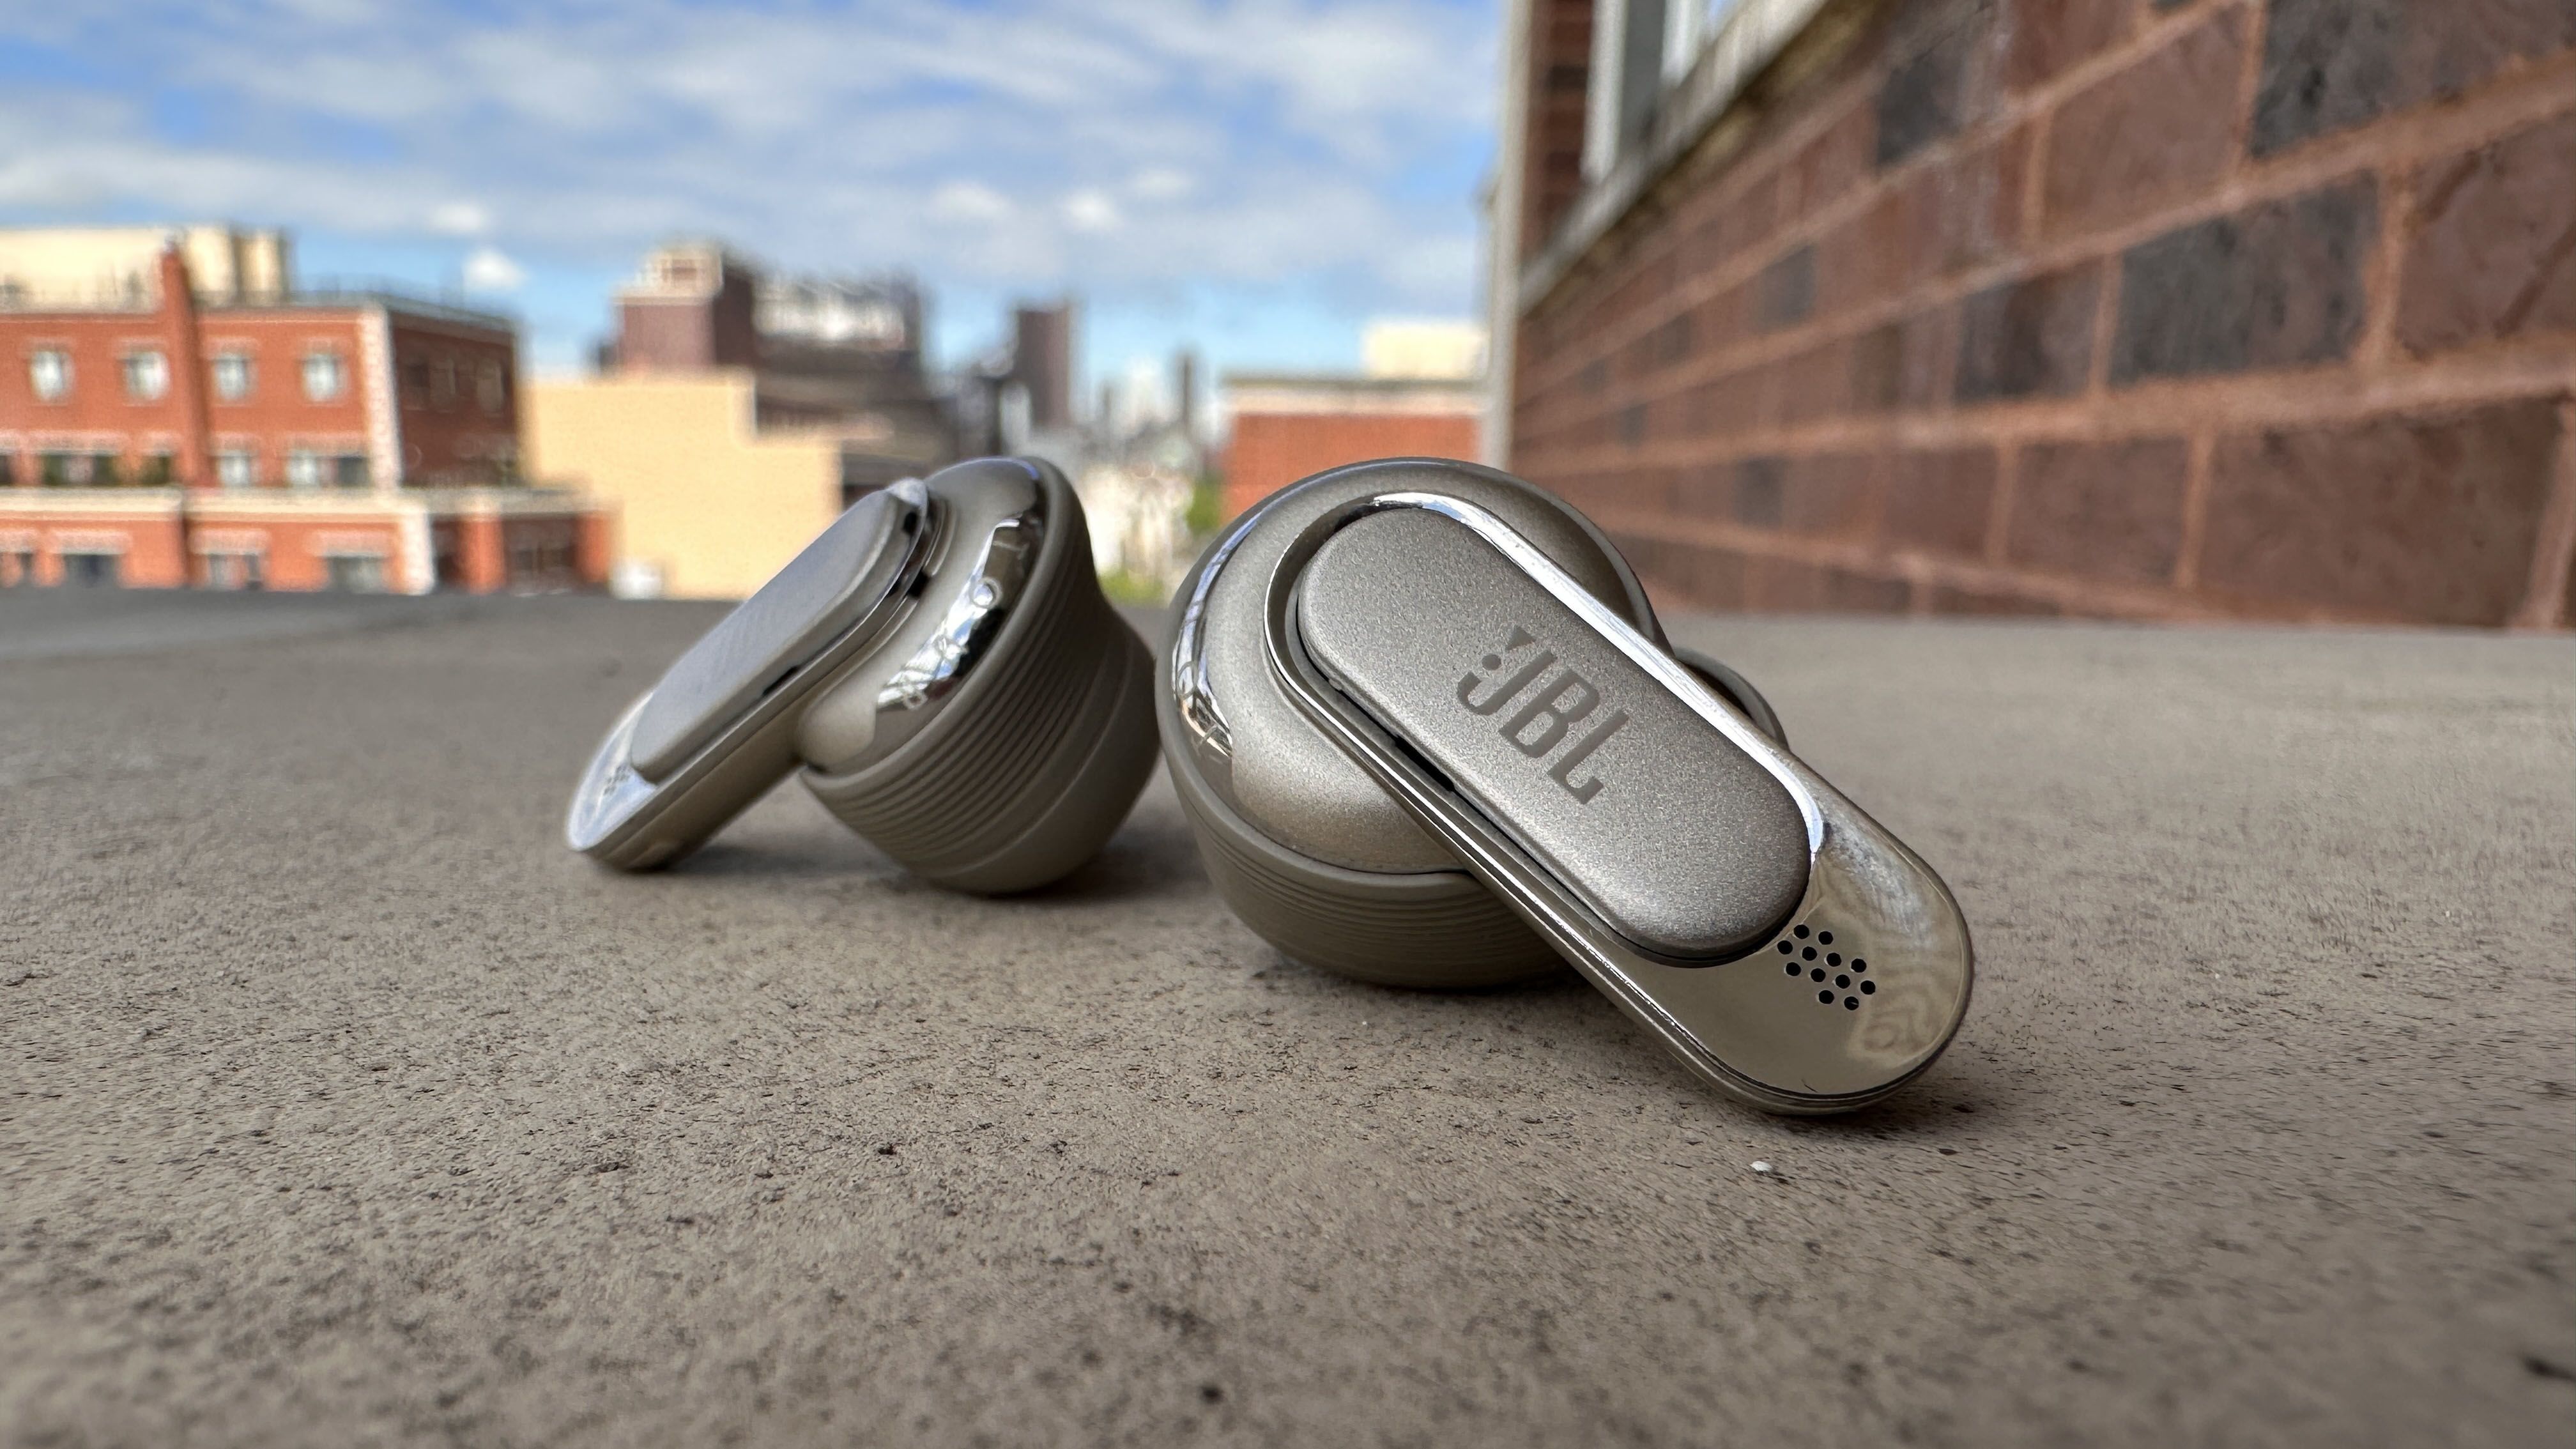 JBL Tour Pro 2 review: these earbuds have a screen - The Verge